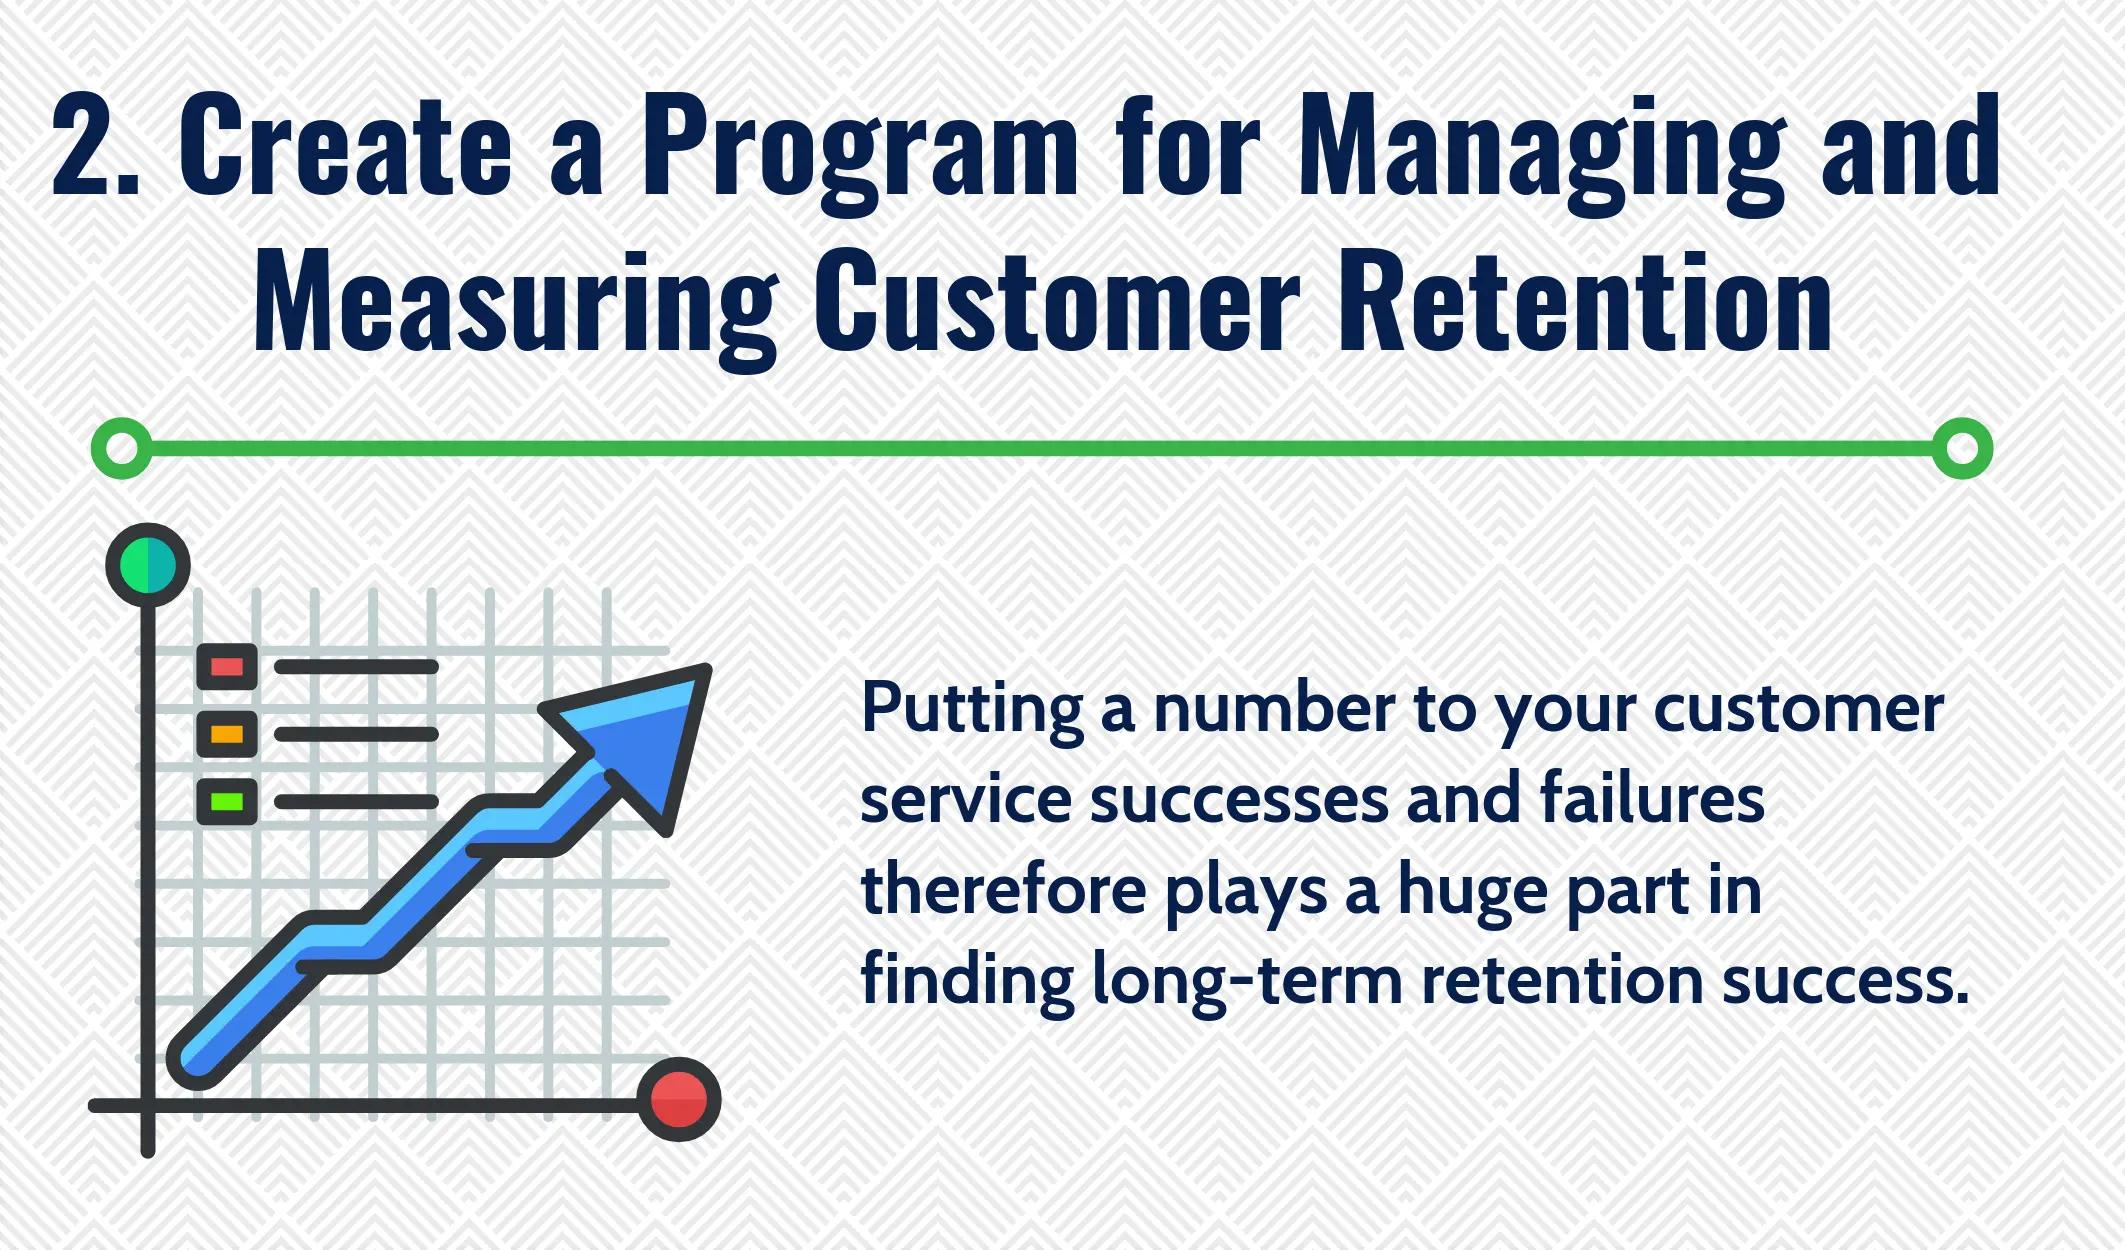 Create a Program for Managing and Measuring Customer Retention